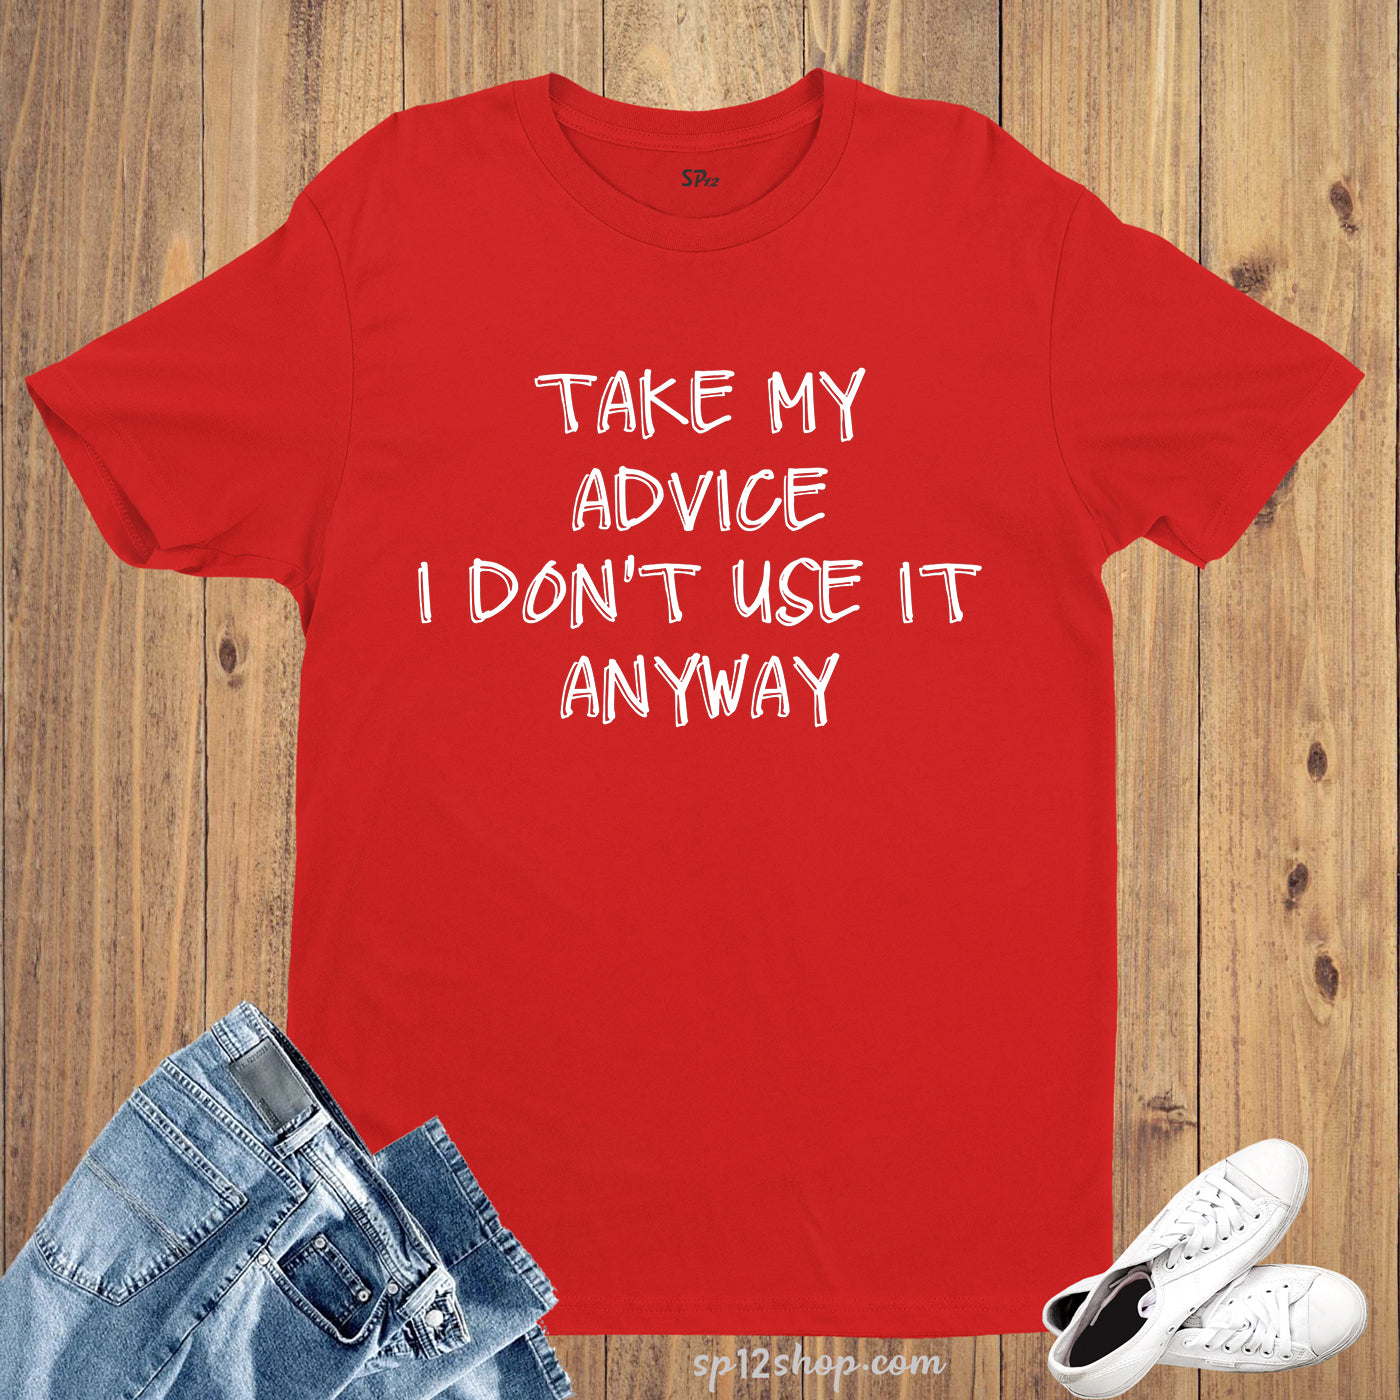 Take My Advice Funny Witty Hilarious Slogan T Shirt